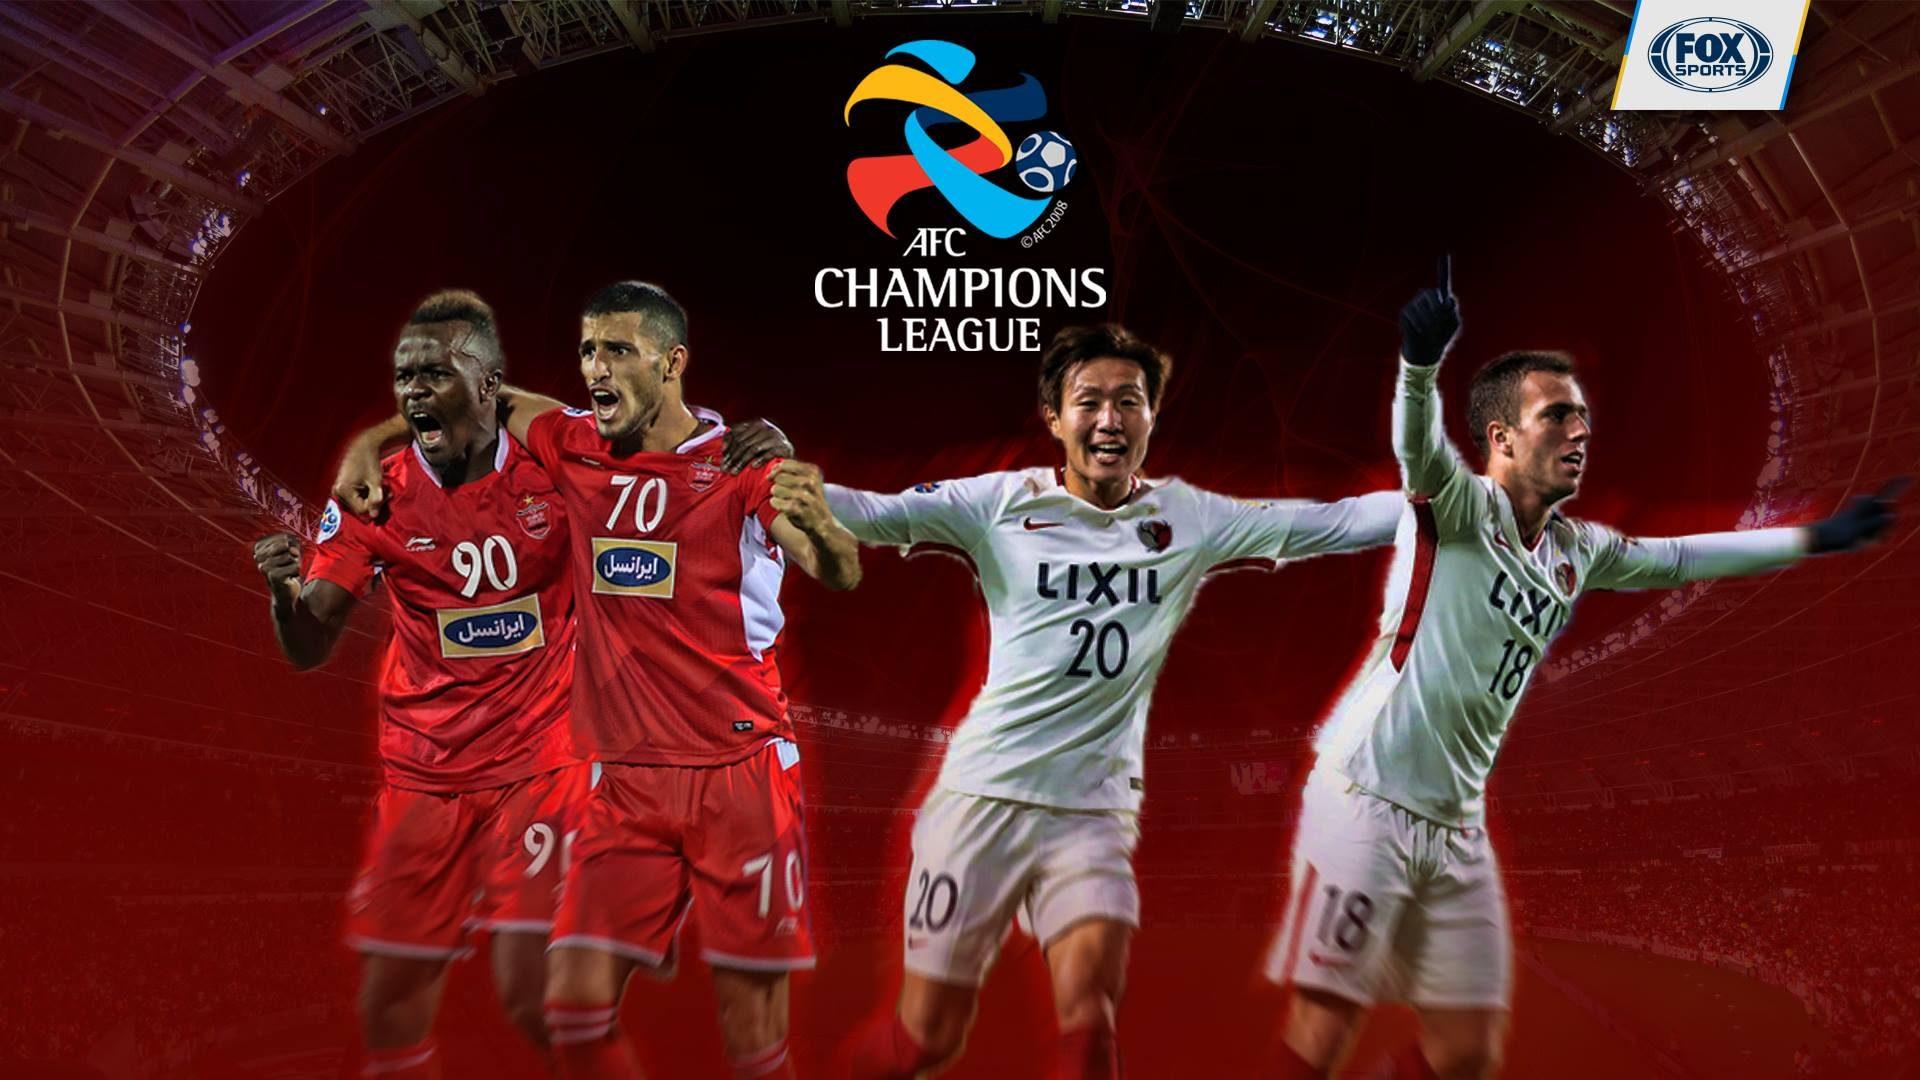 AFC Champions League Wallpapers Wallpaper Cave